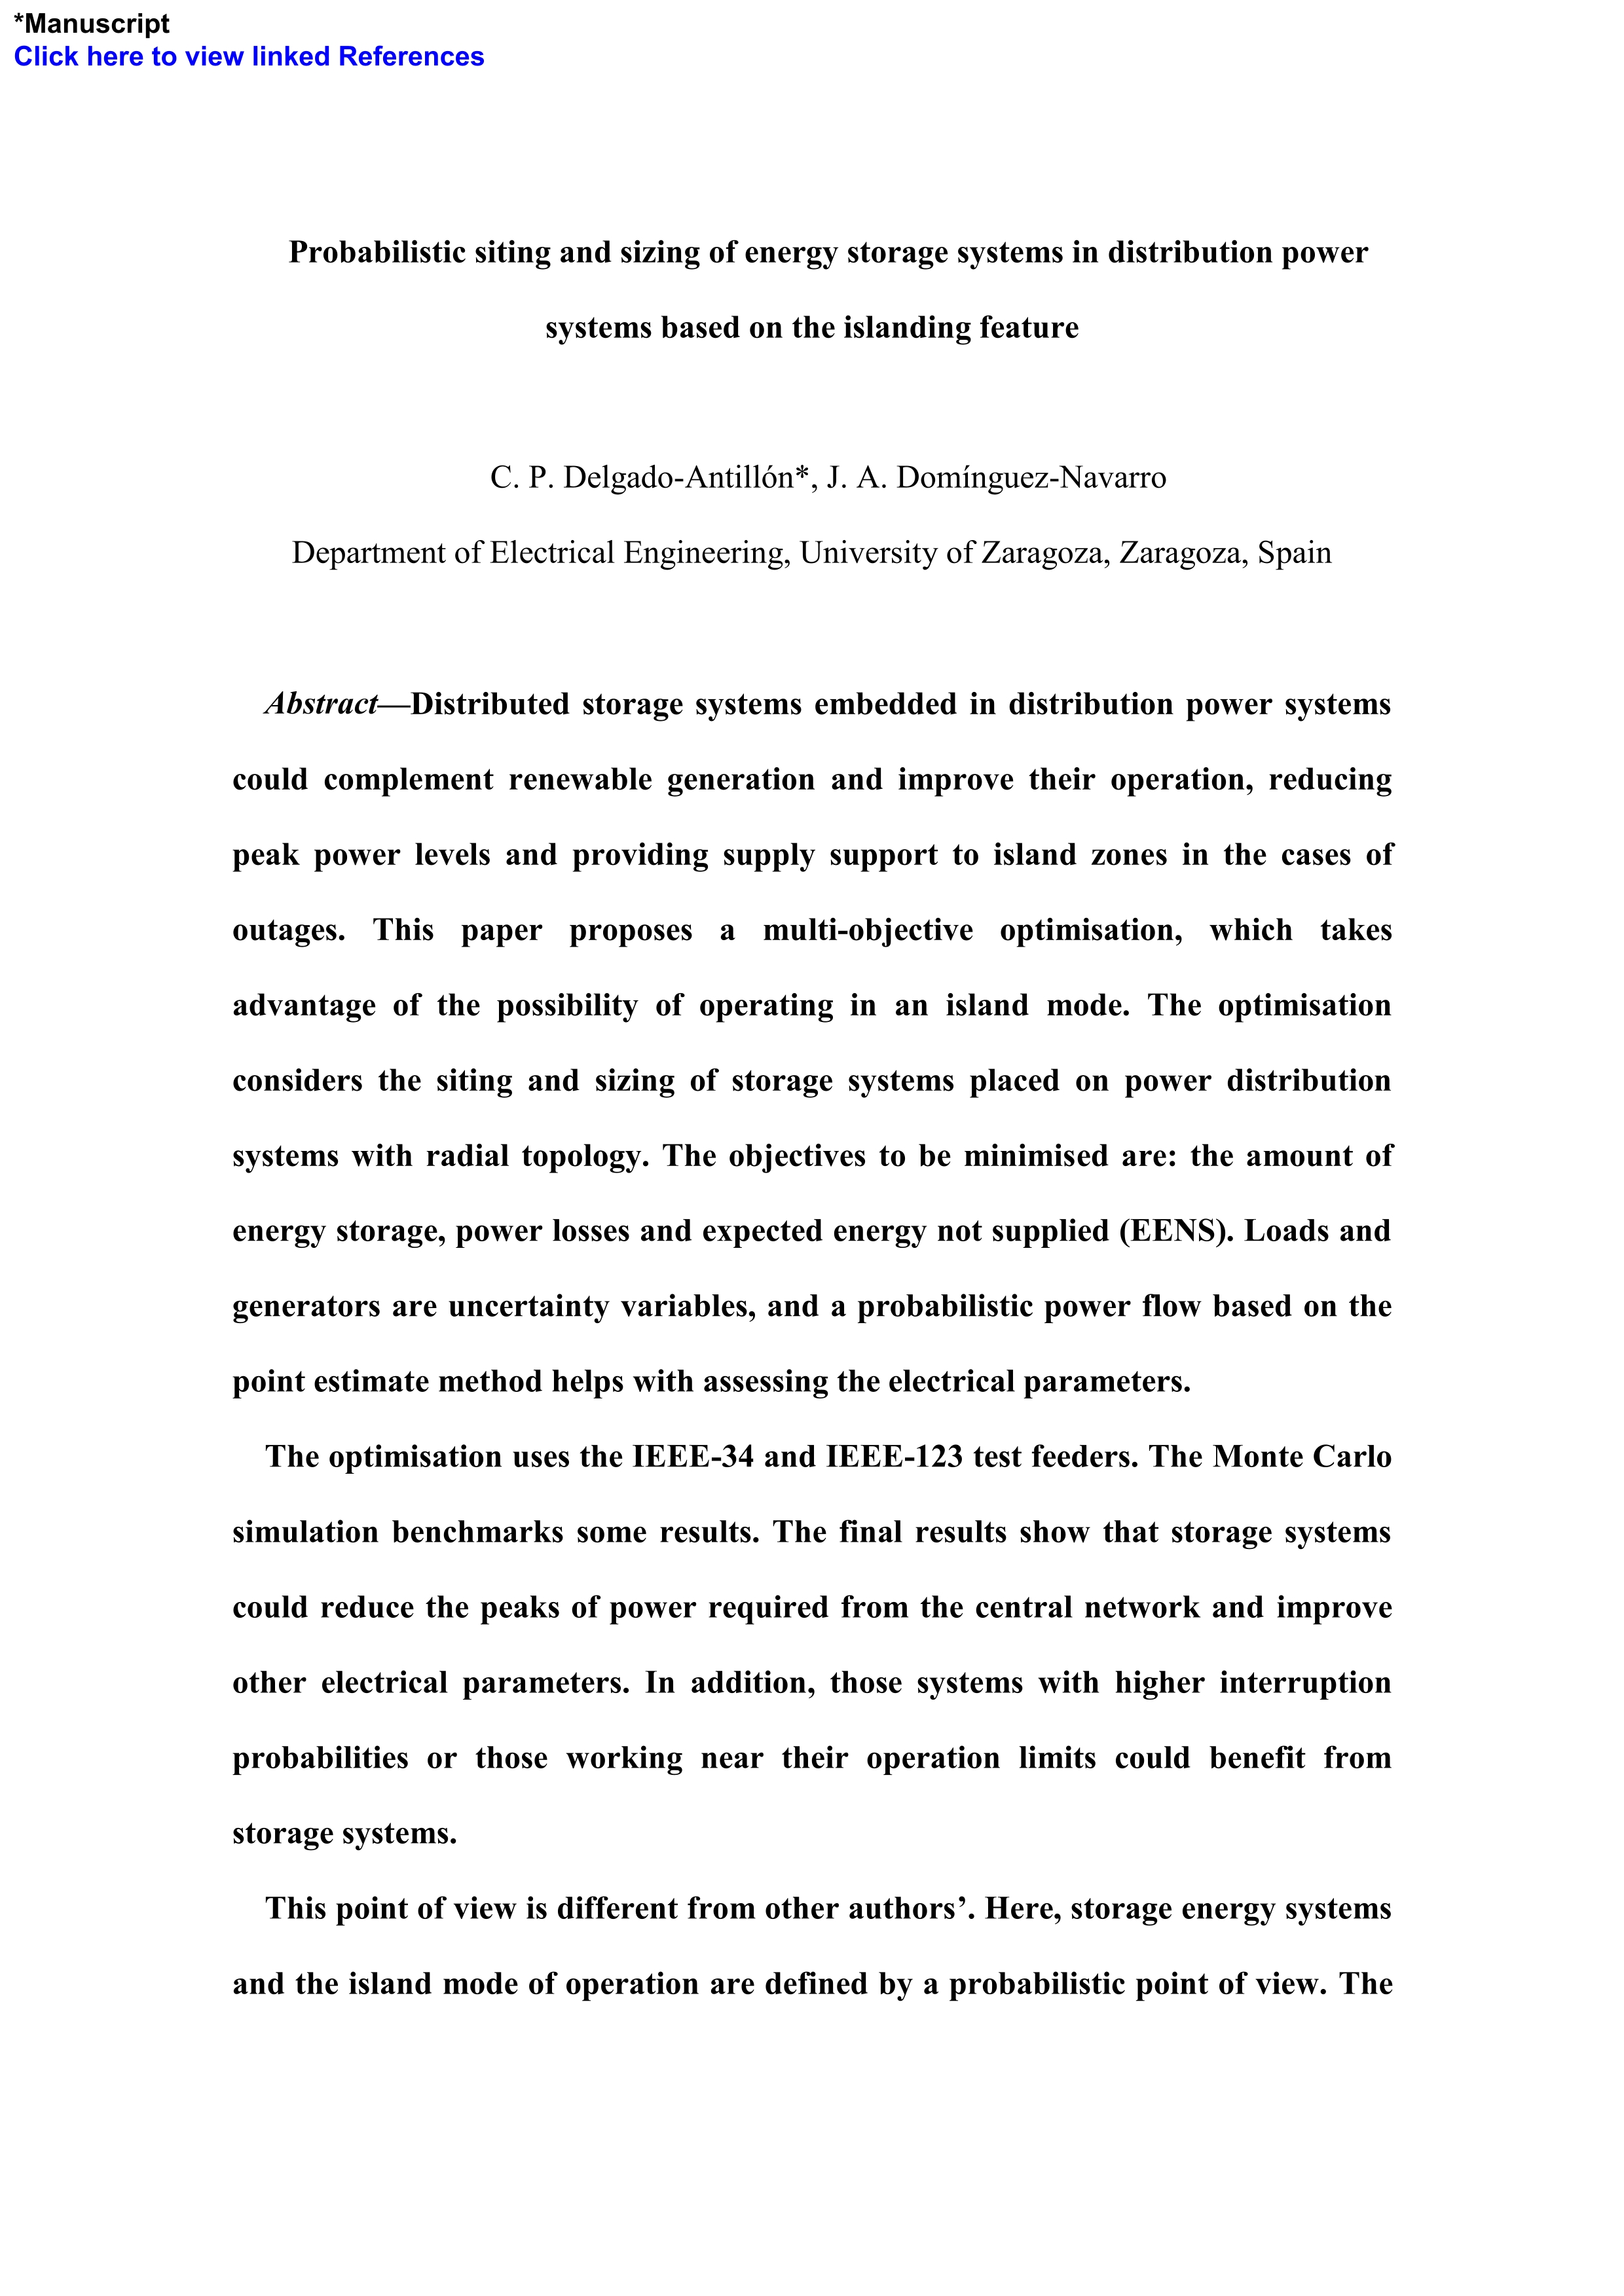 Probabilistic siting and sizing of energy storage systems in distribution power systems based on the islanding feature